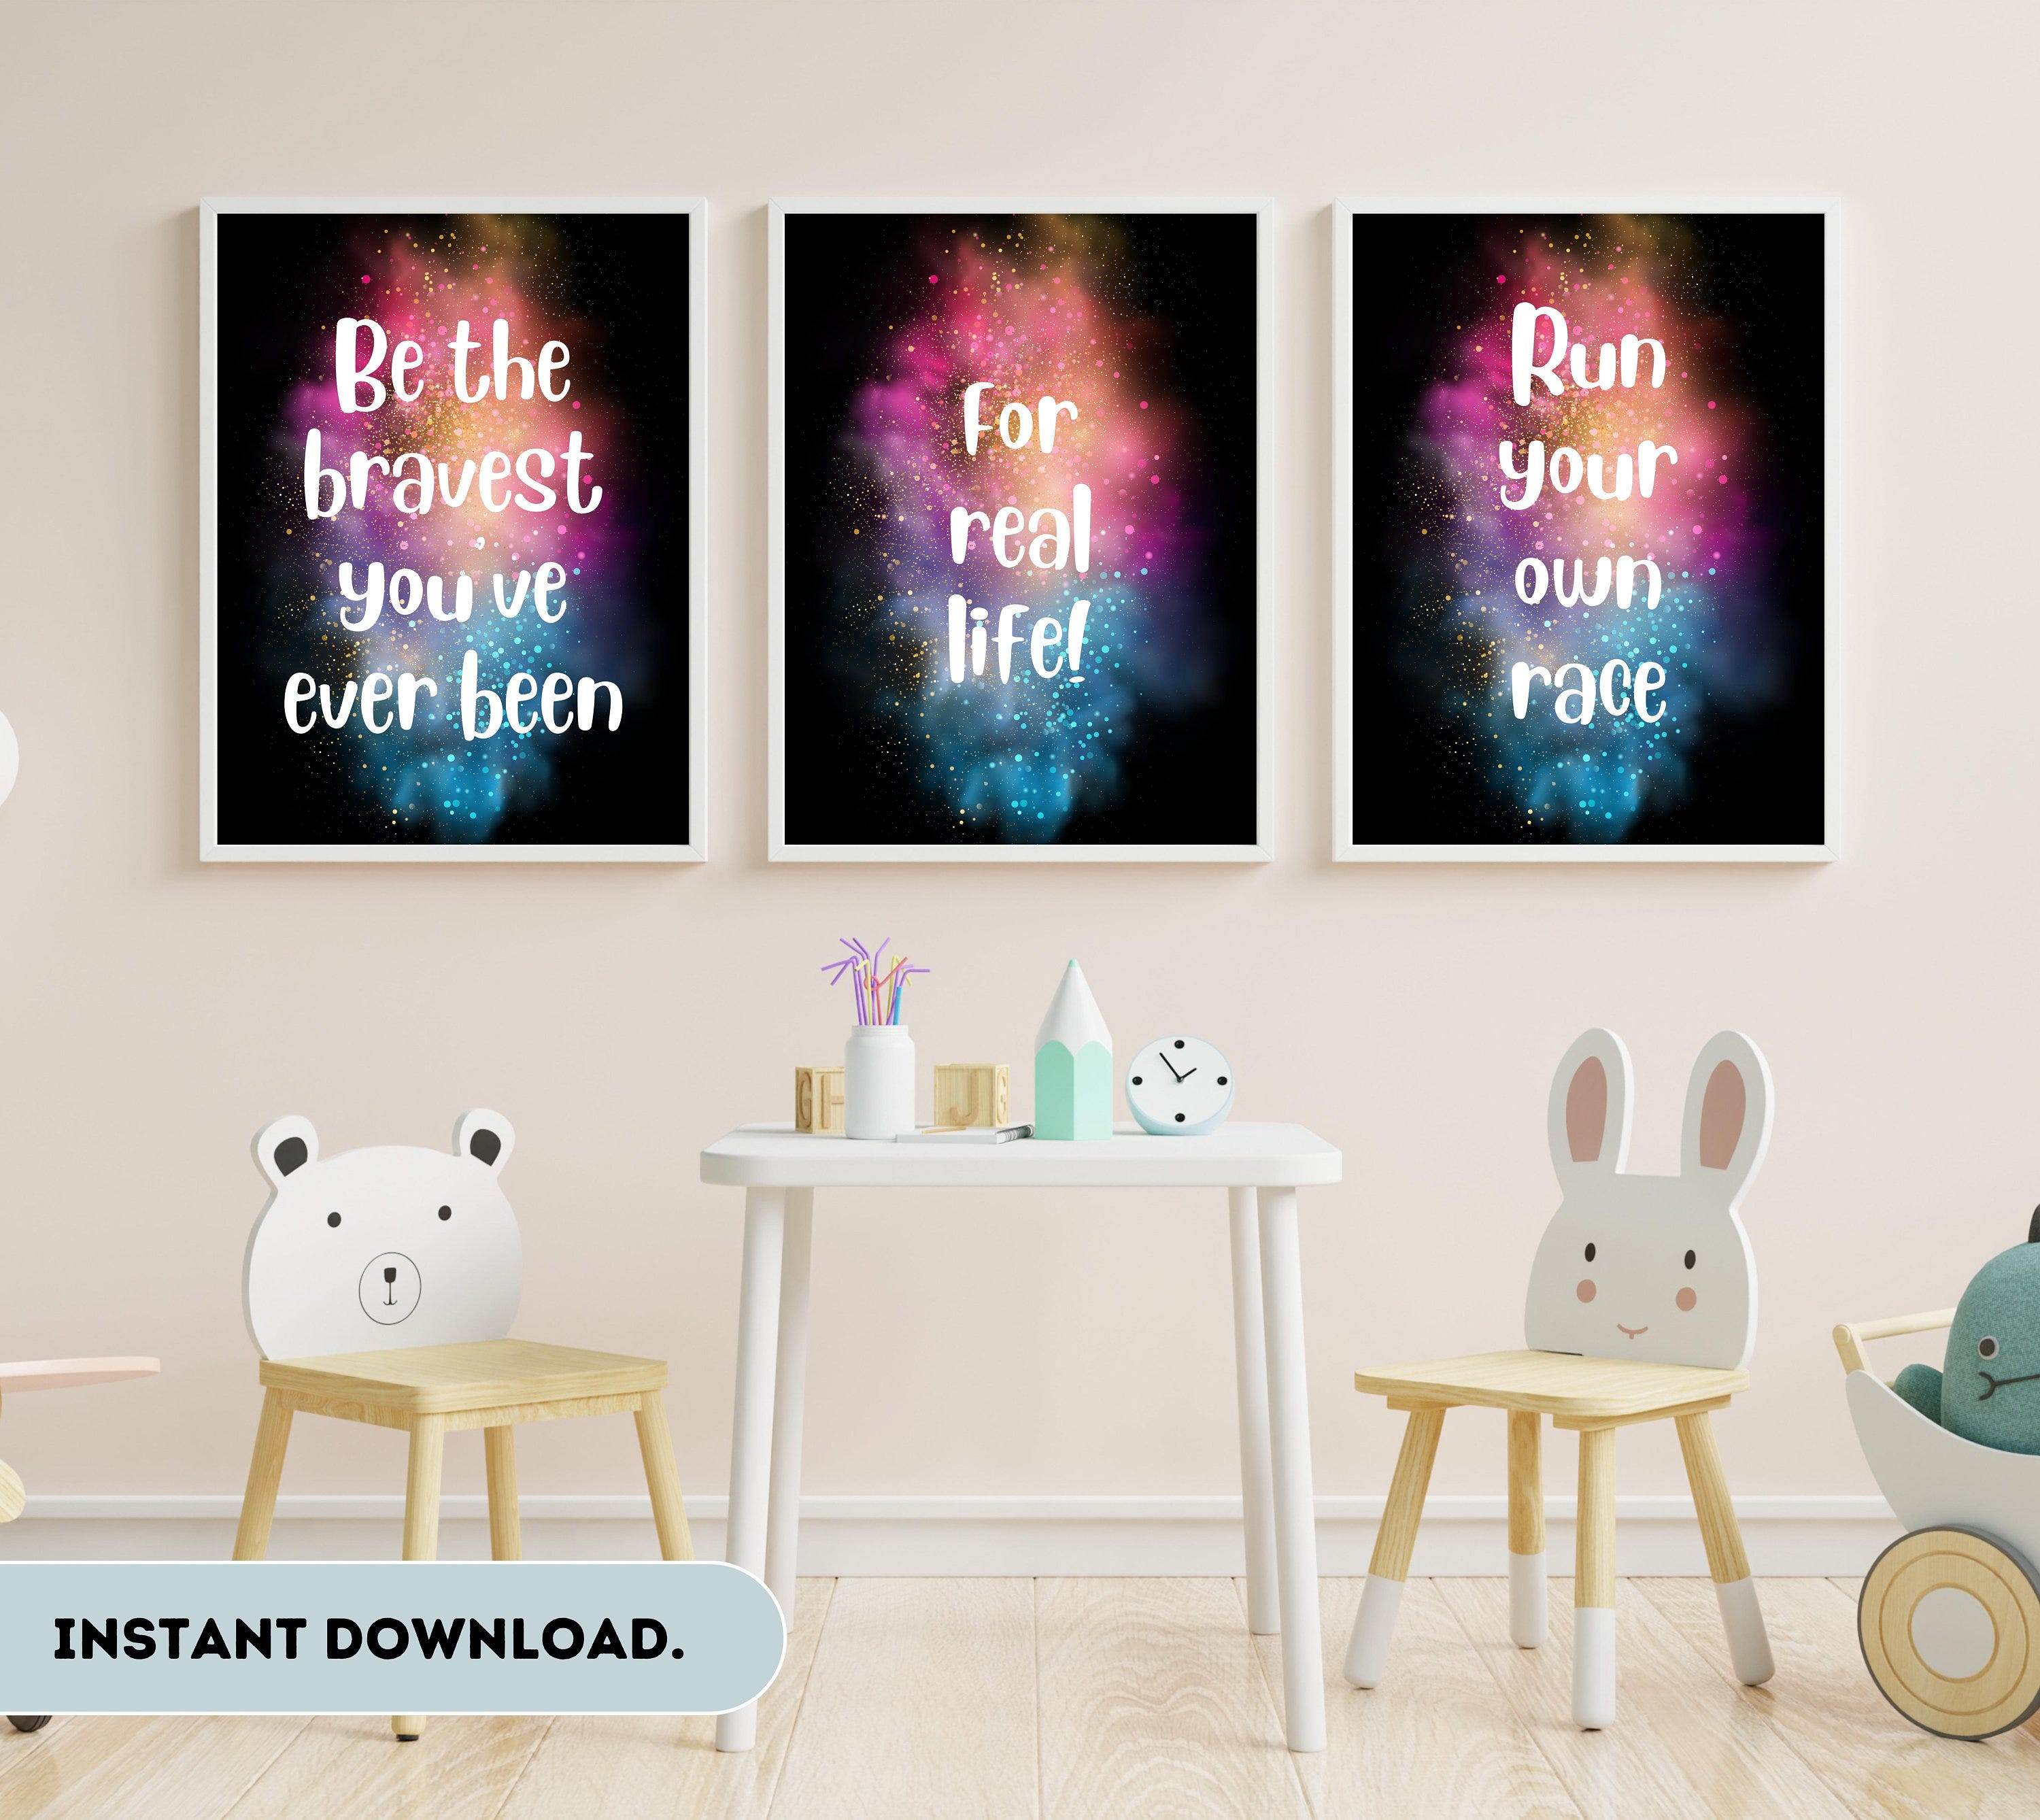 Bluey 3x Quotes on sleepytime background - For Real Life, Run your own race, Bravest you